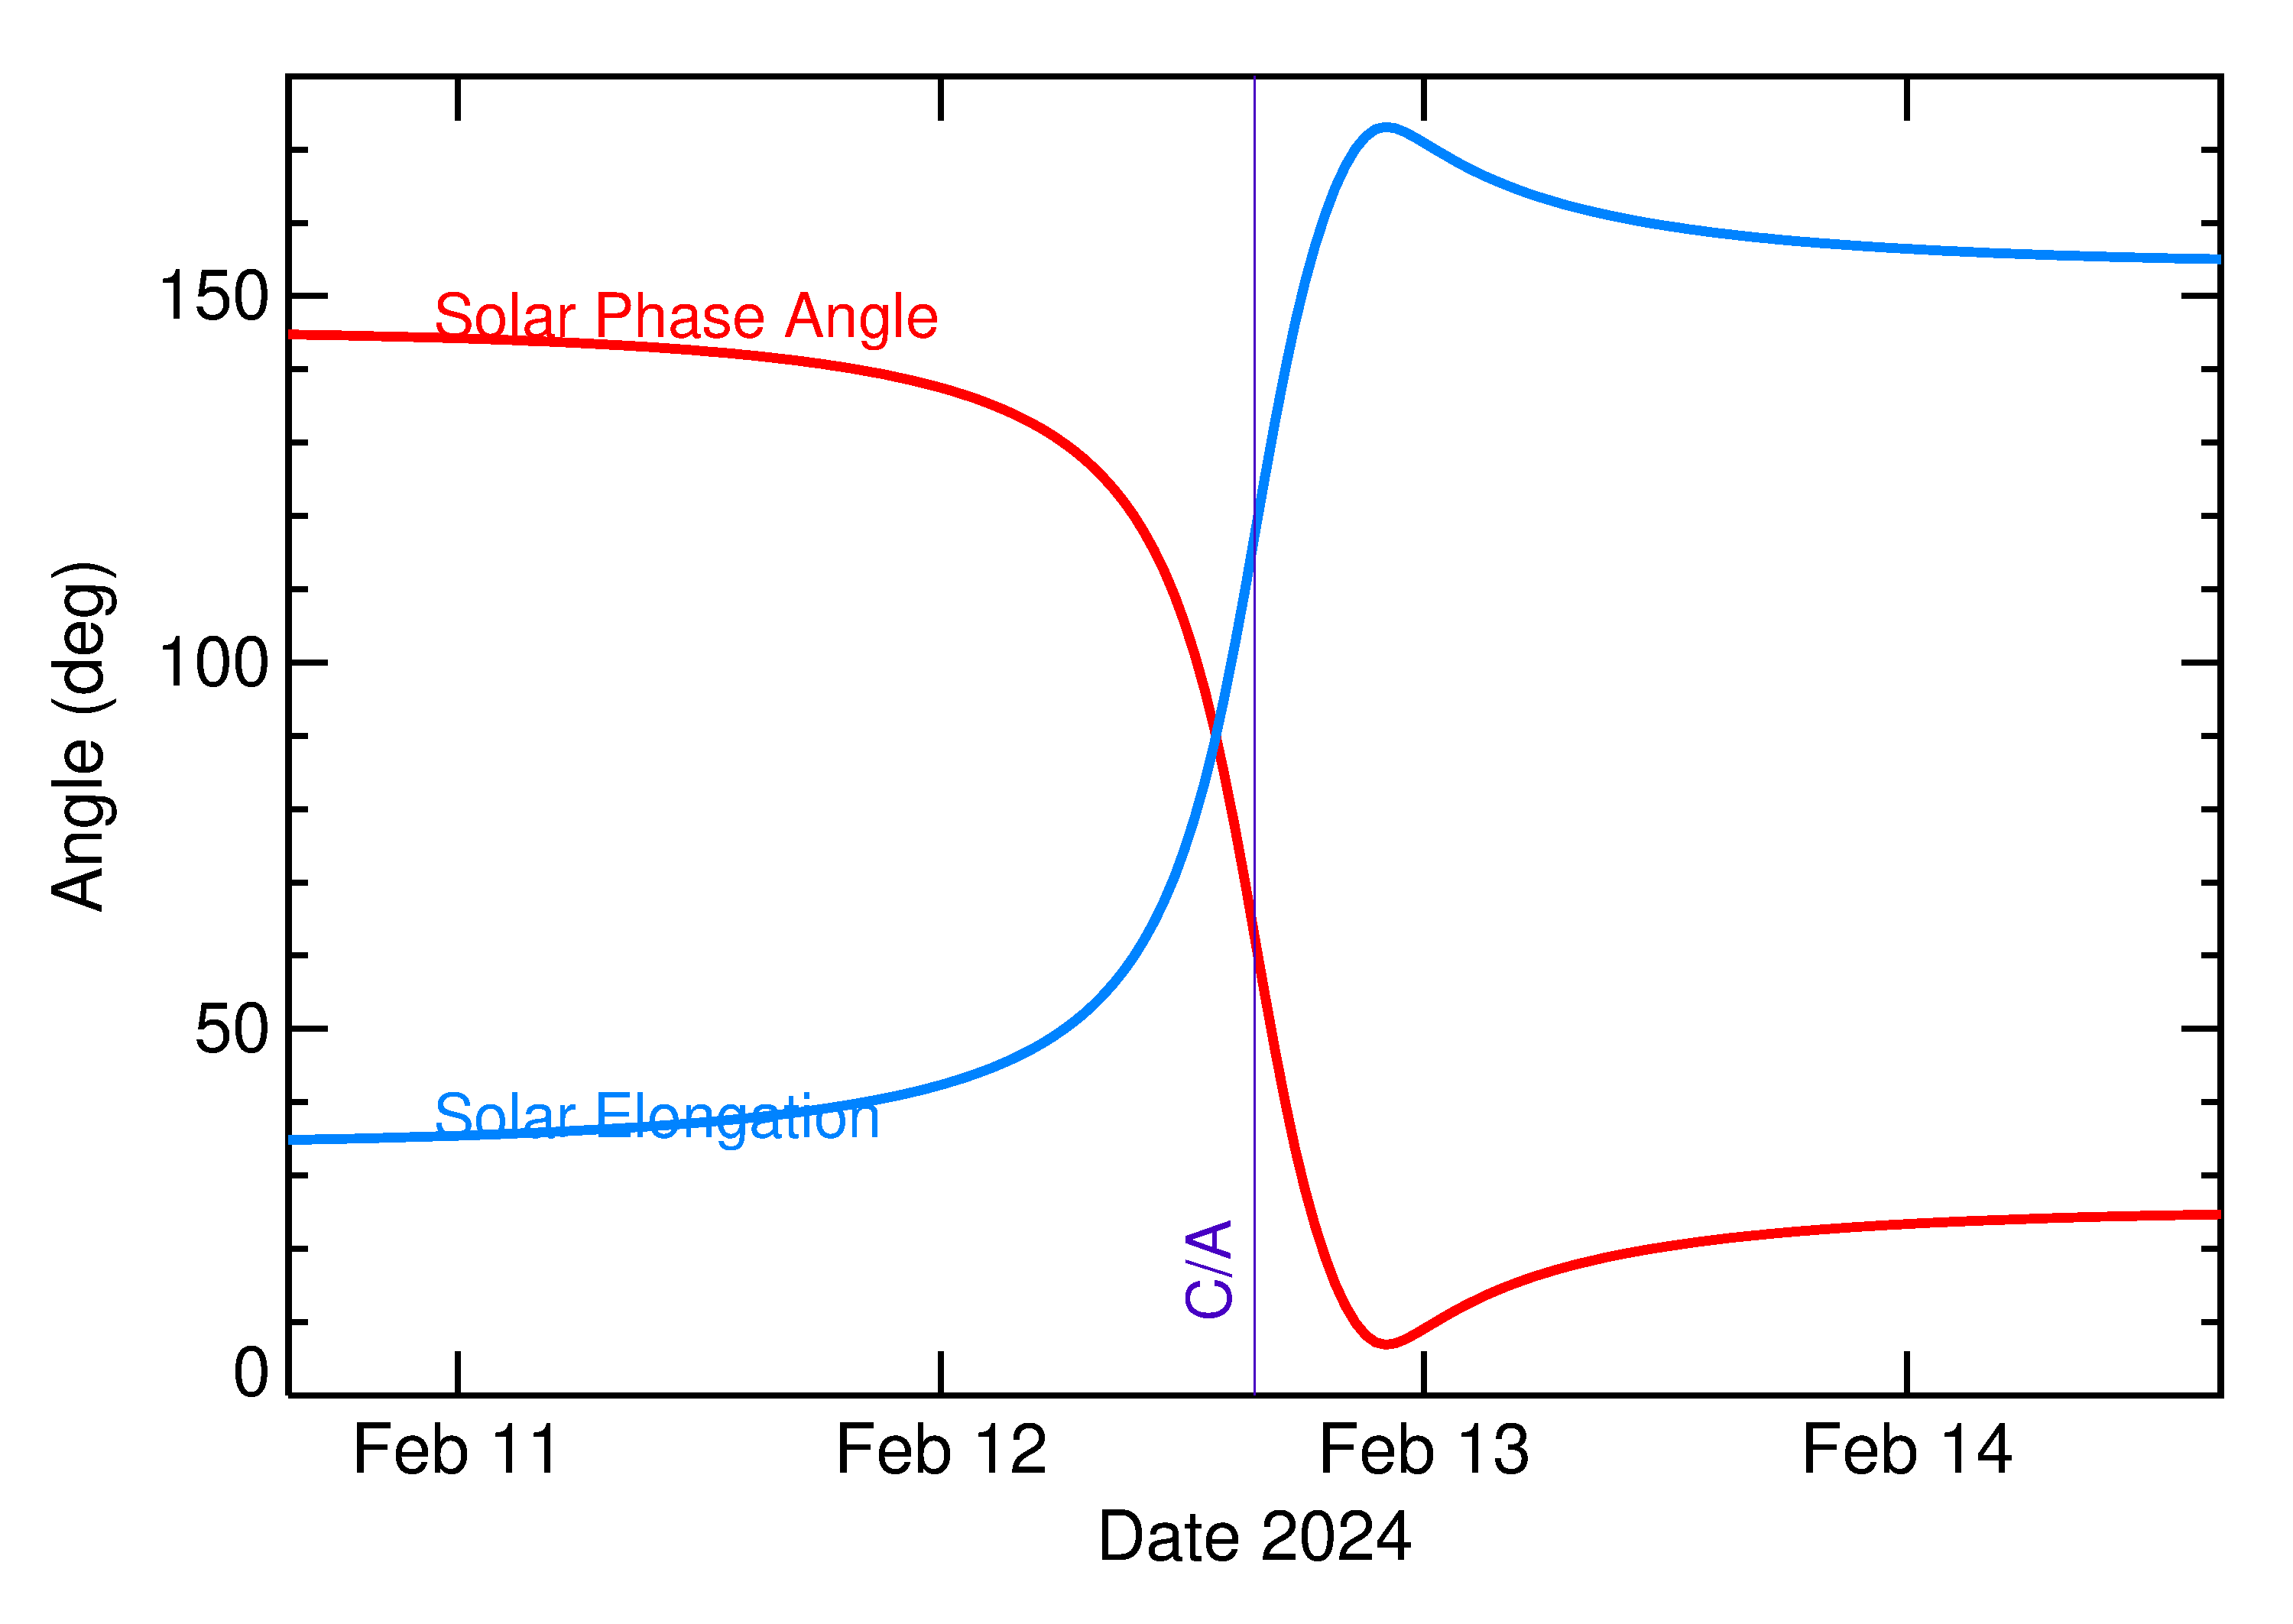 Solar Elongation and Solar Phase Angle of 2024 CM5 in the days around closest approach